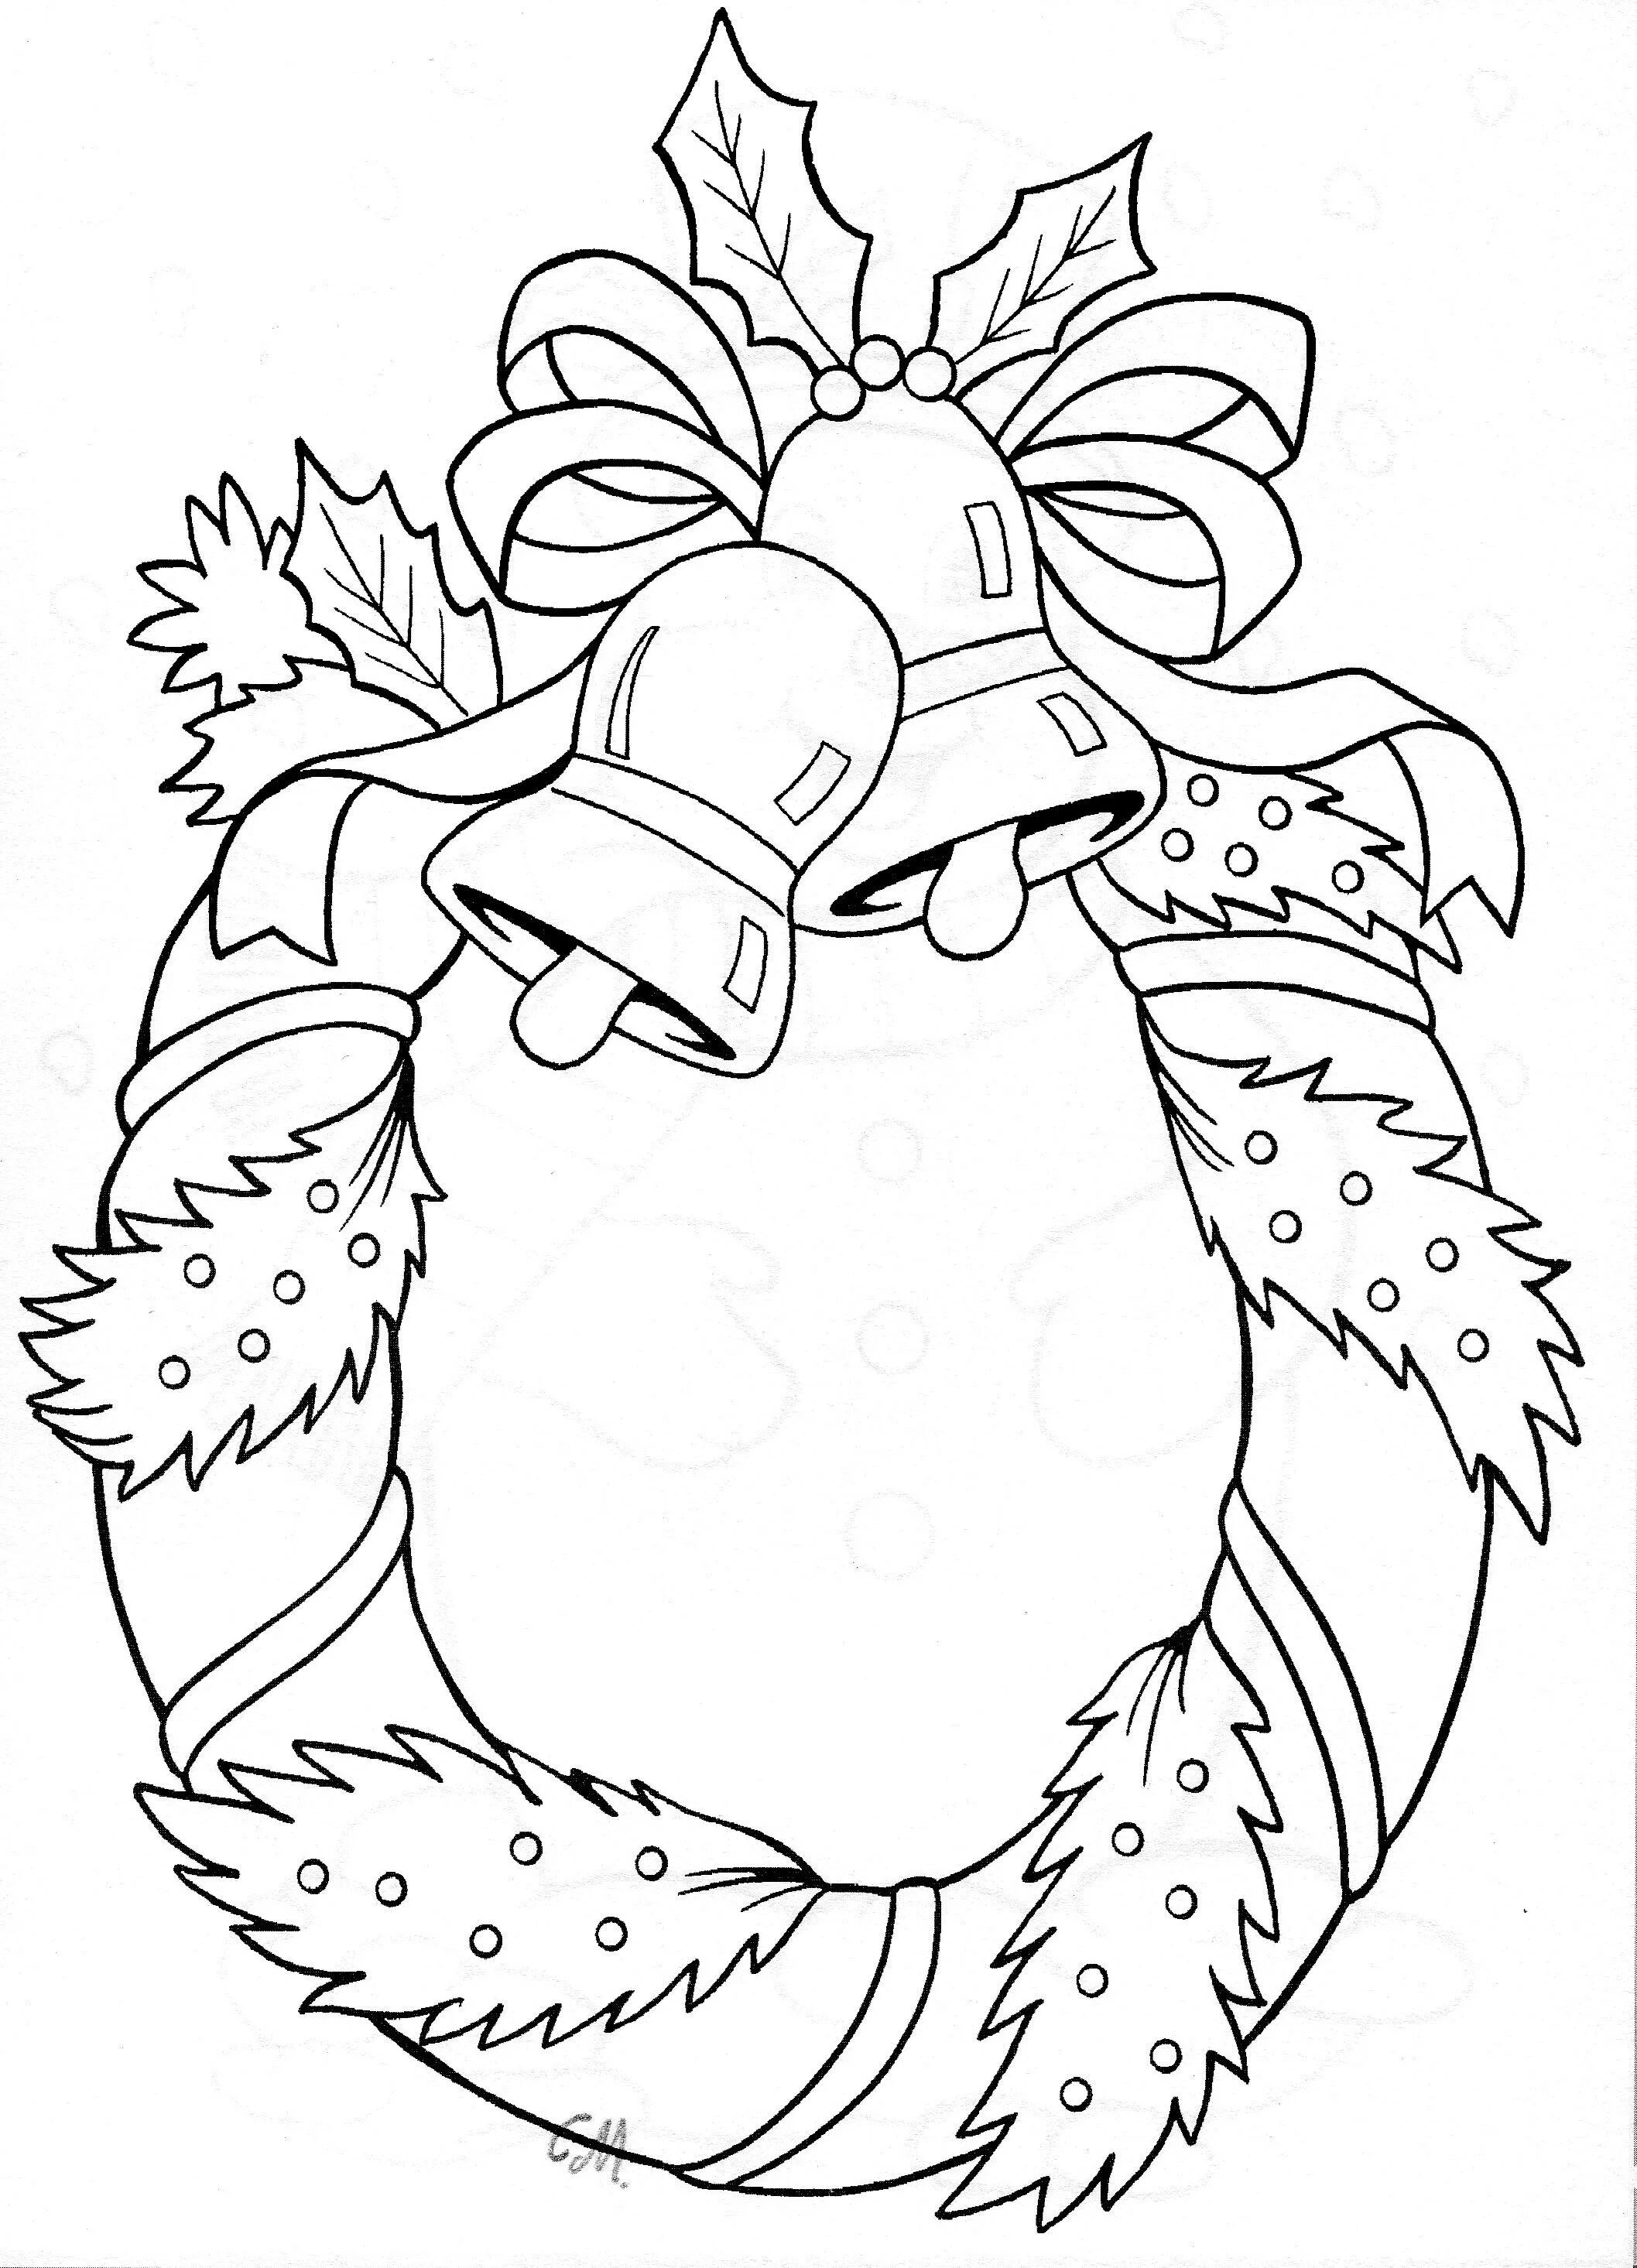 Generous Christmas wreath coloring book for kids